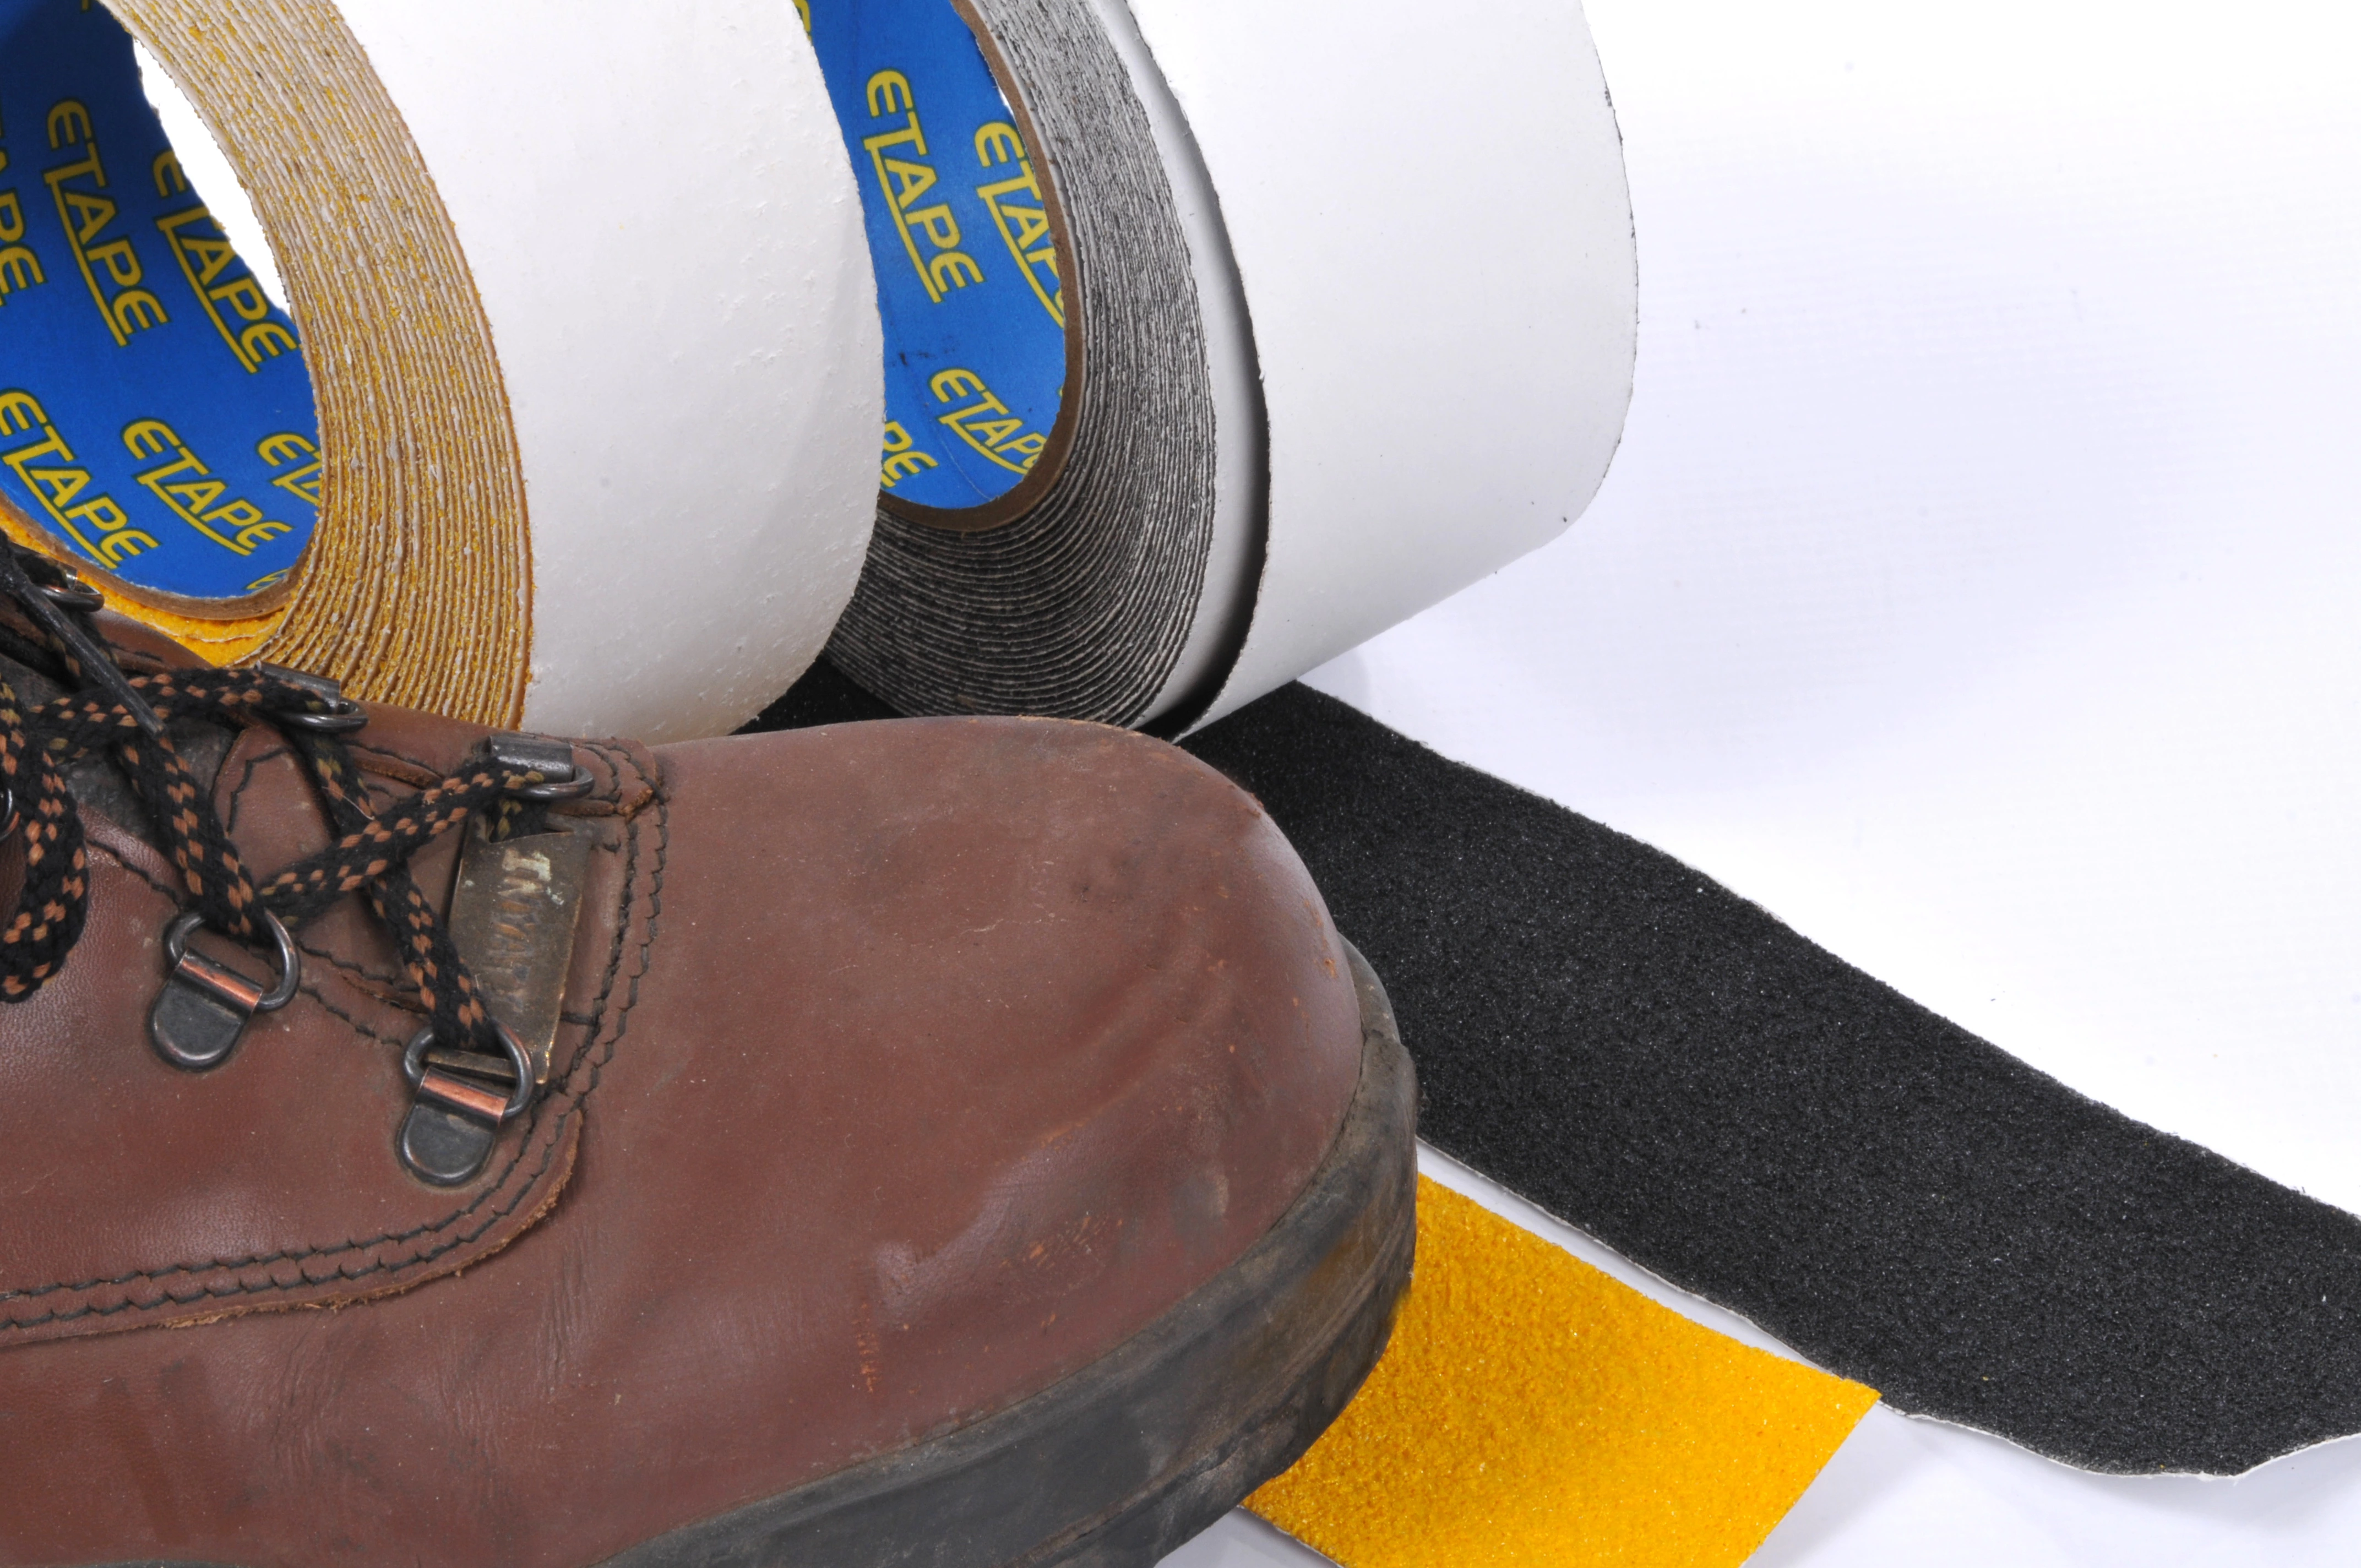 Traction tape used to quick resolutions of problematic slippery surfaces sold by Easitape